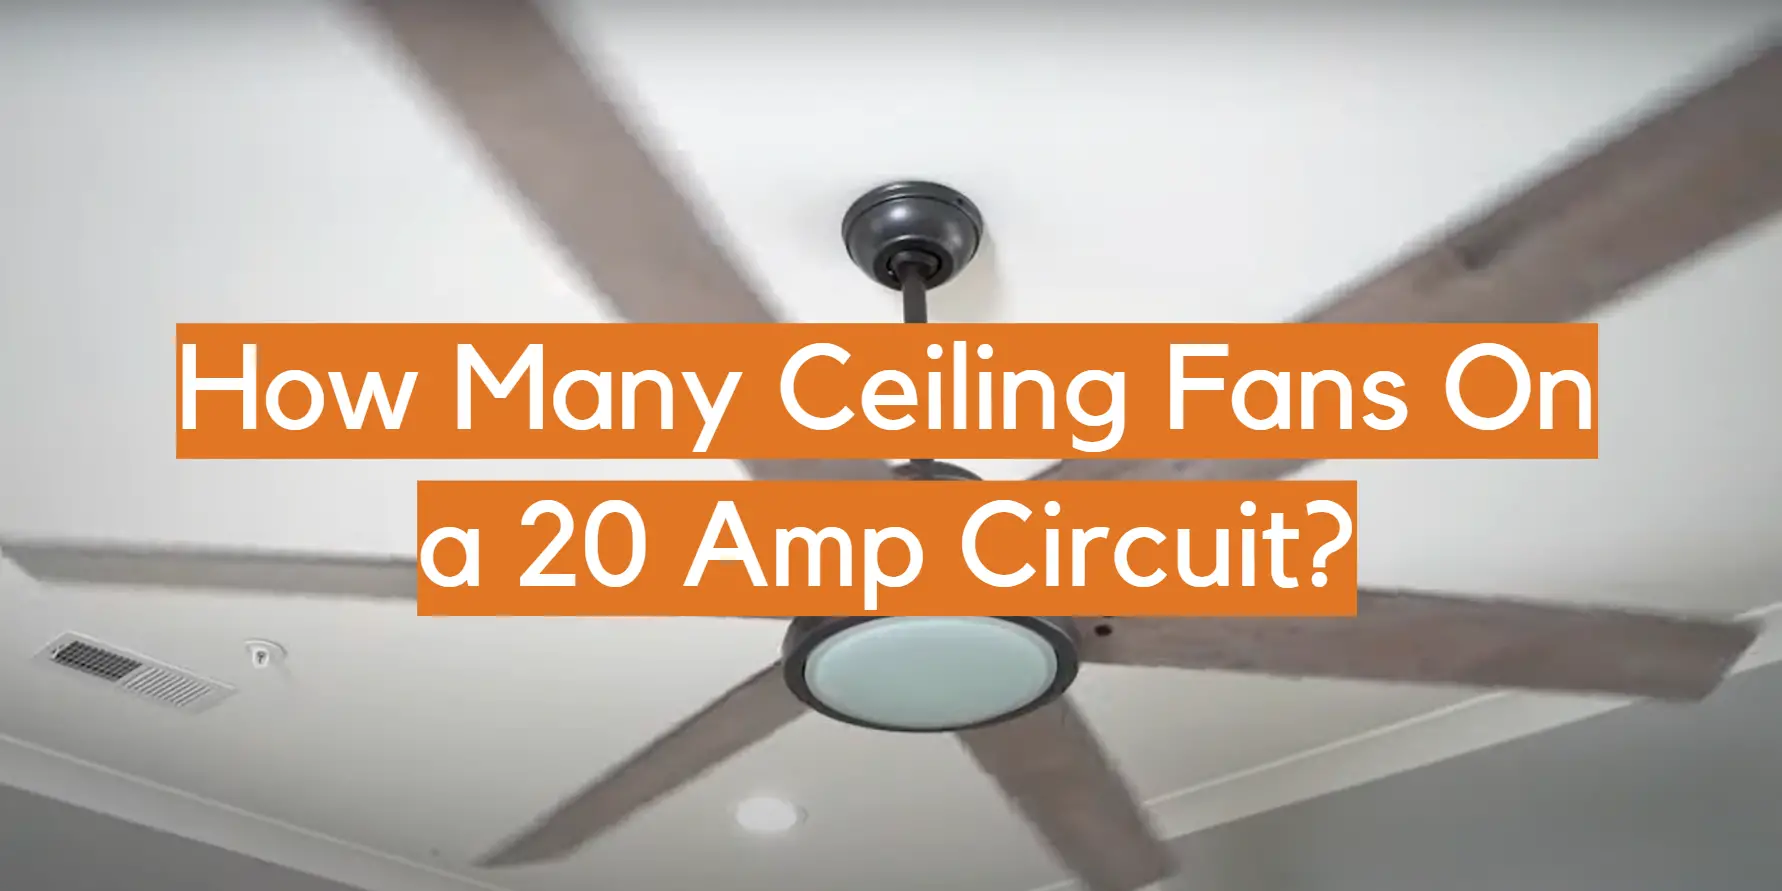 Ceiling Fans On A 20 Amp Circuit